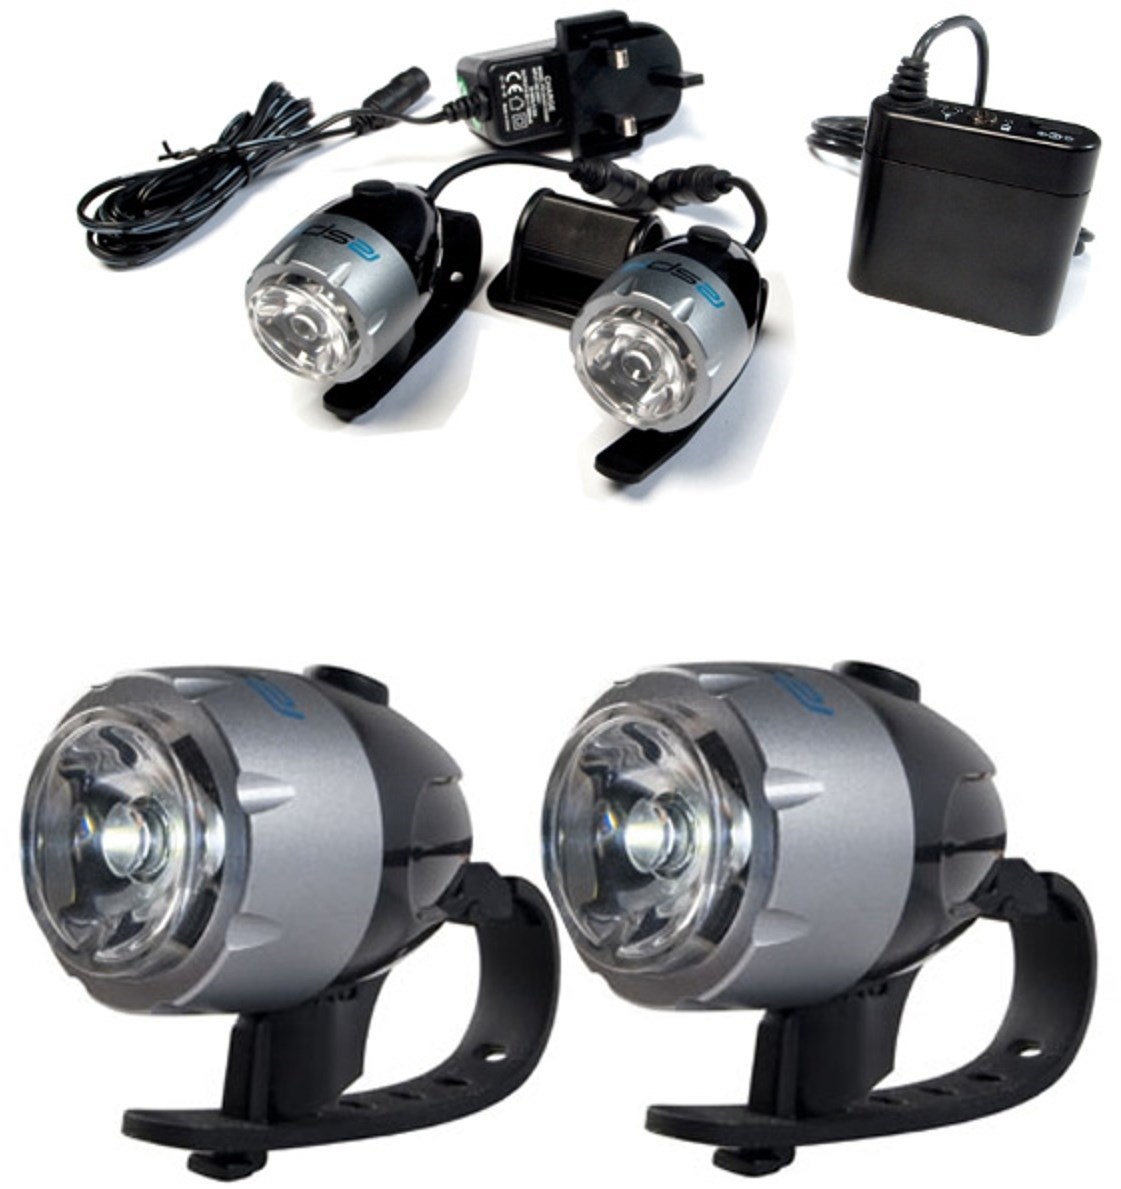 RSP Asteri 2 x 1 Watt Rechargeable Front Headlight Set - 2 Pack product image